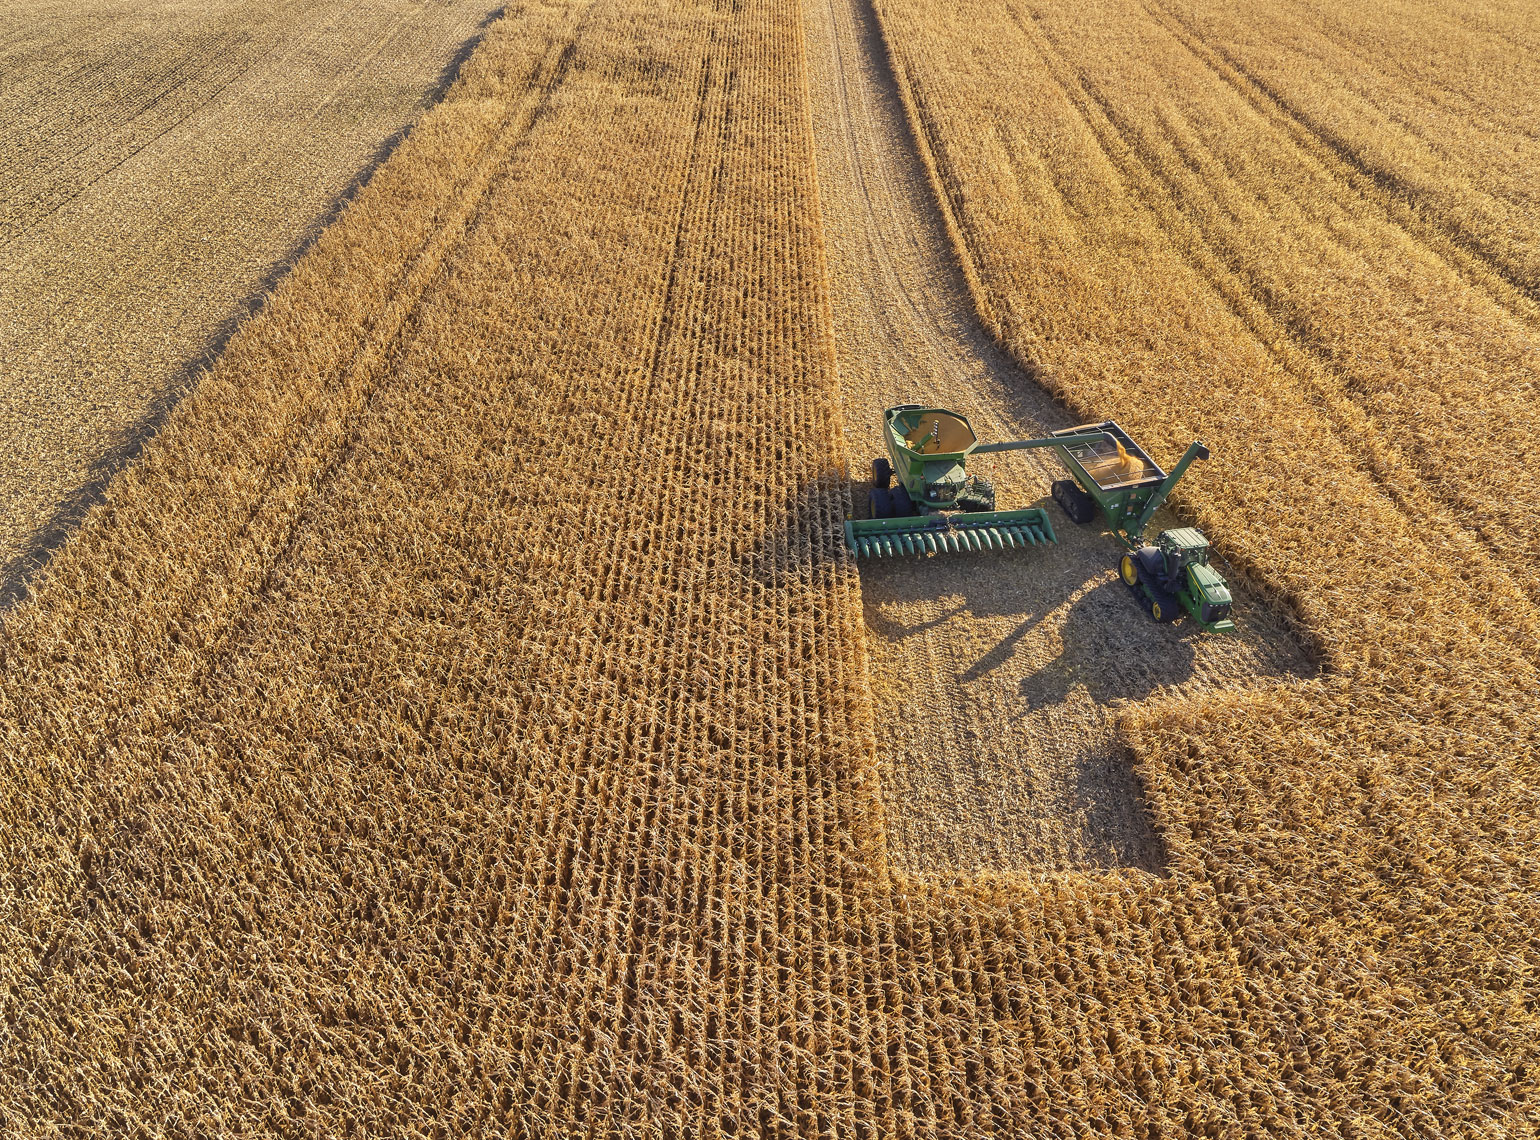 Drone/farm equipment/harvest/agricultural photography/InsideOut Studio